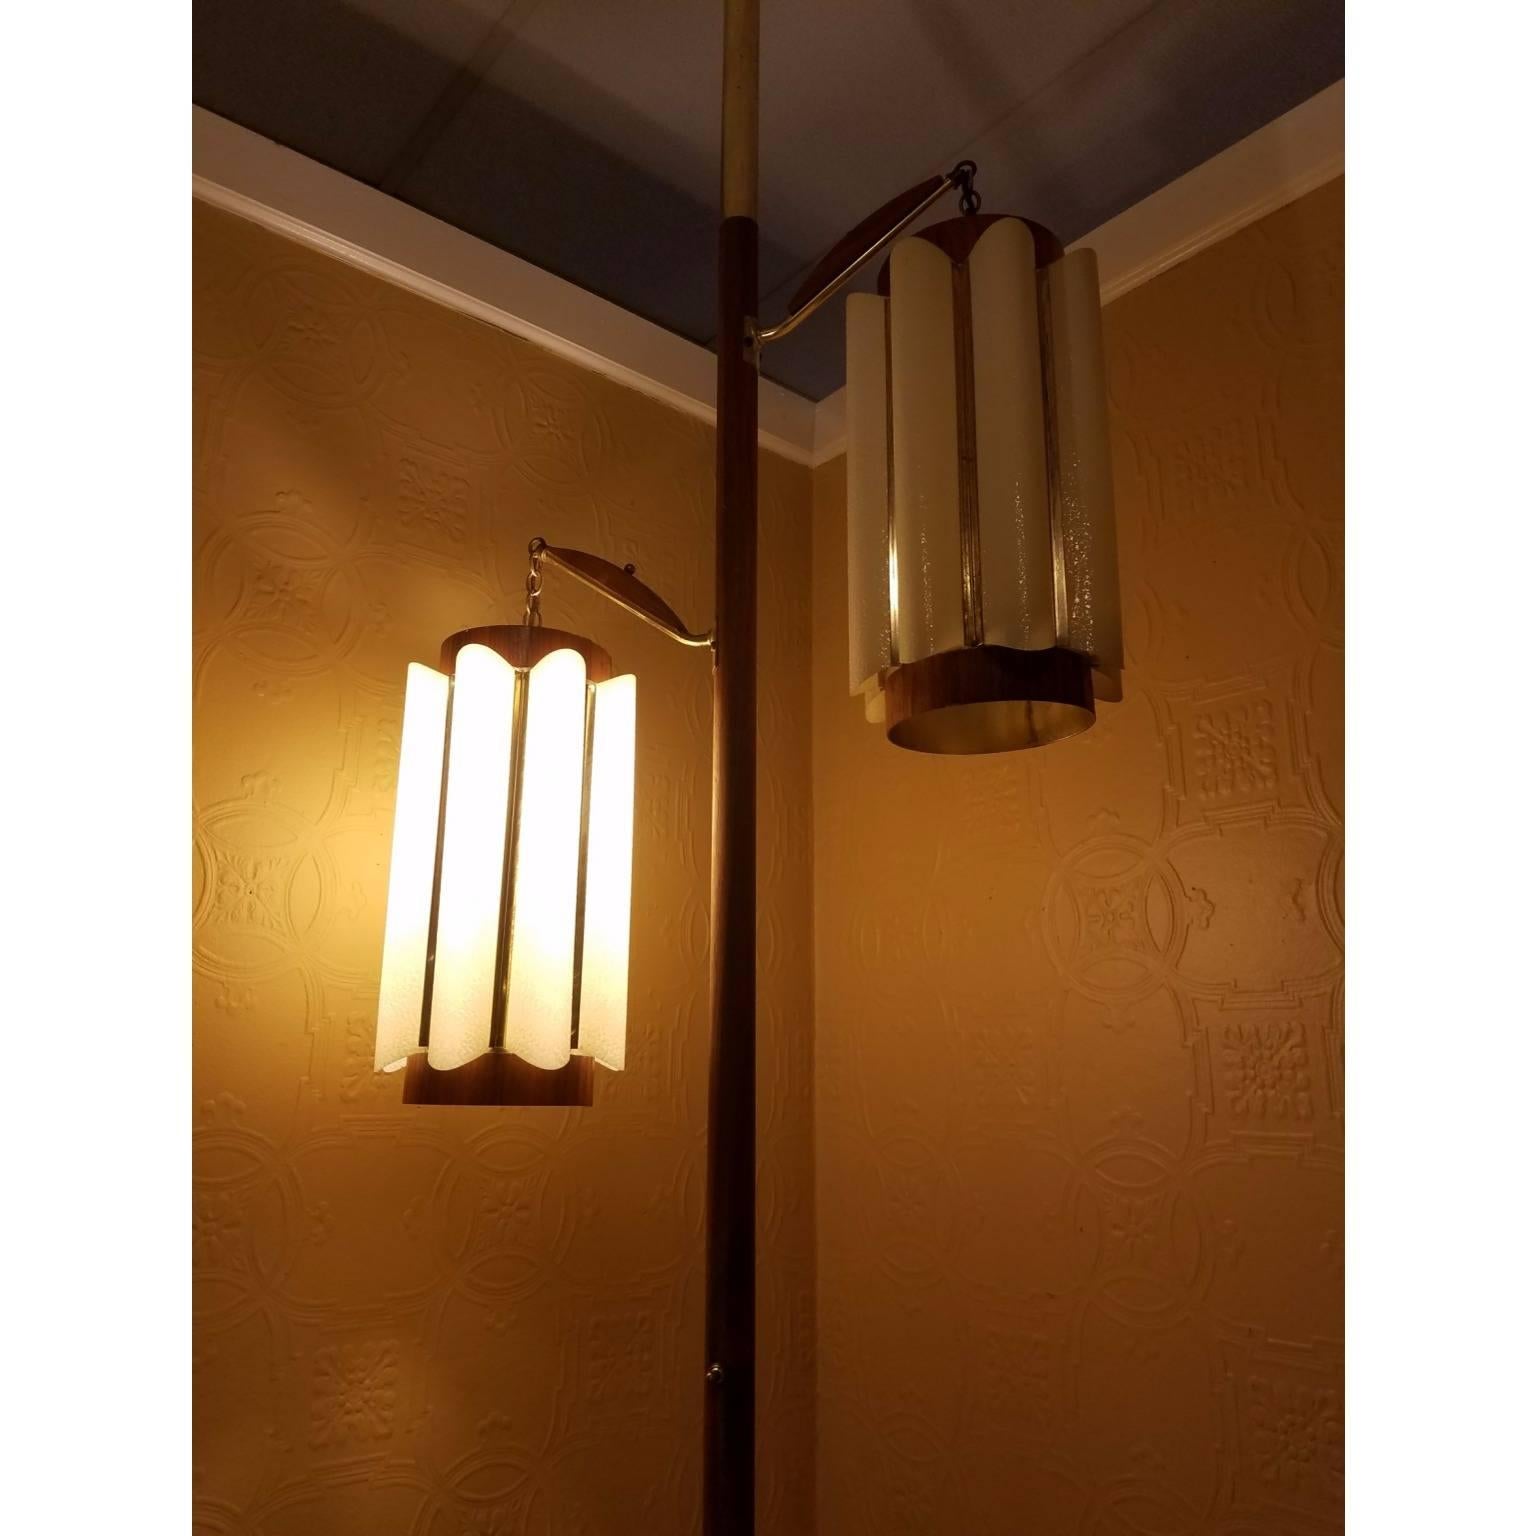 One of the best Tension Pole lamps we have had the pleasure in selling. This lamp has a pole made of wood and the lampshades are fiberglass. There is no cracks or chips in the shades. The lamp has a three-way light switch on it, so you can turn the